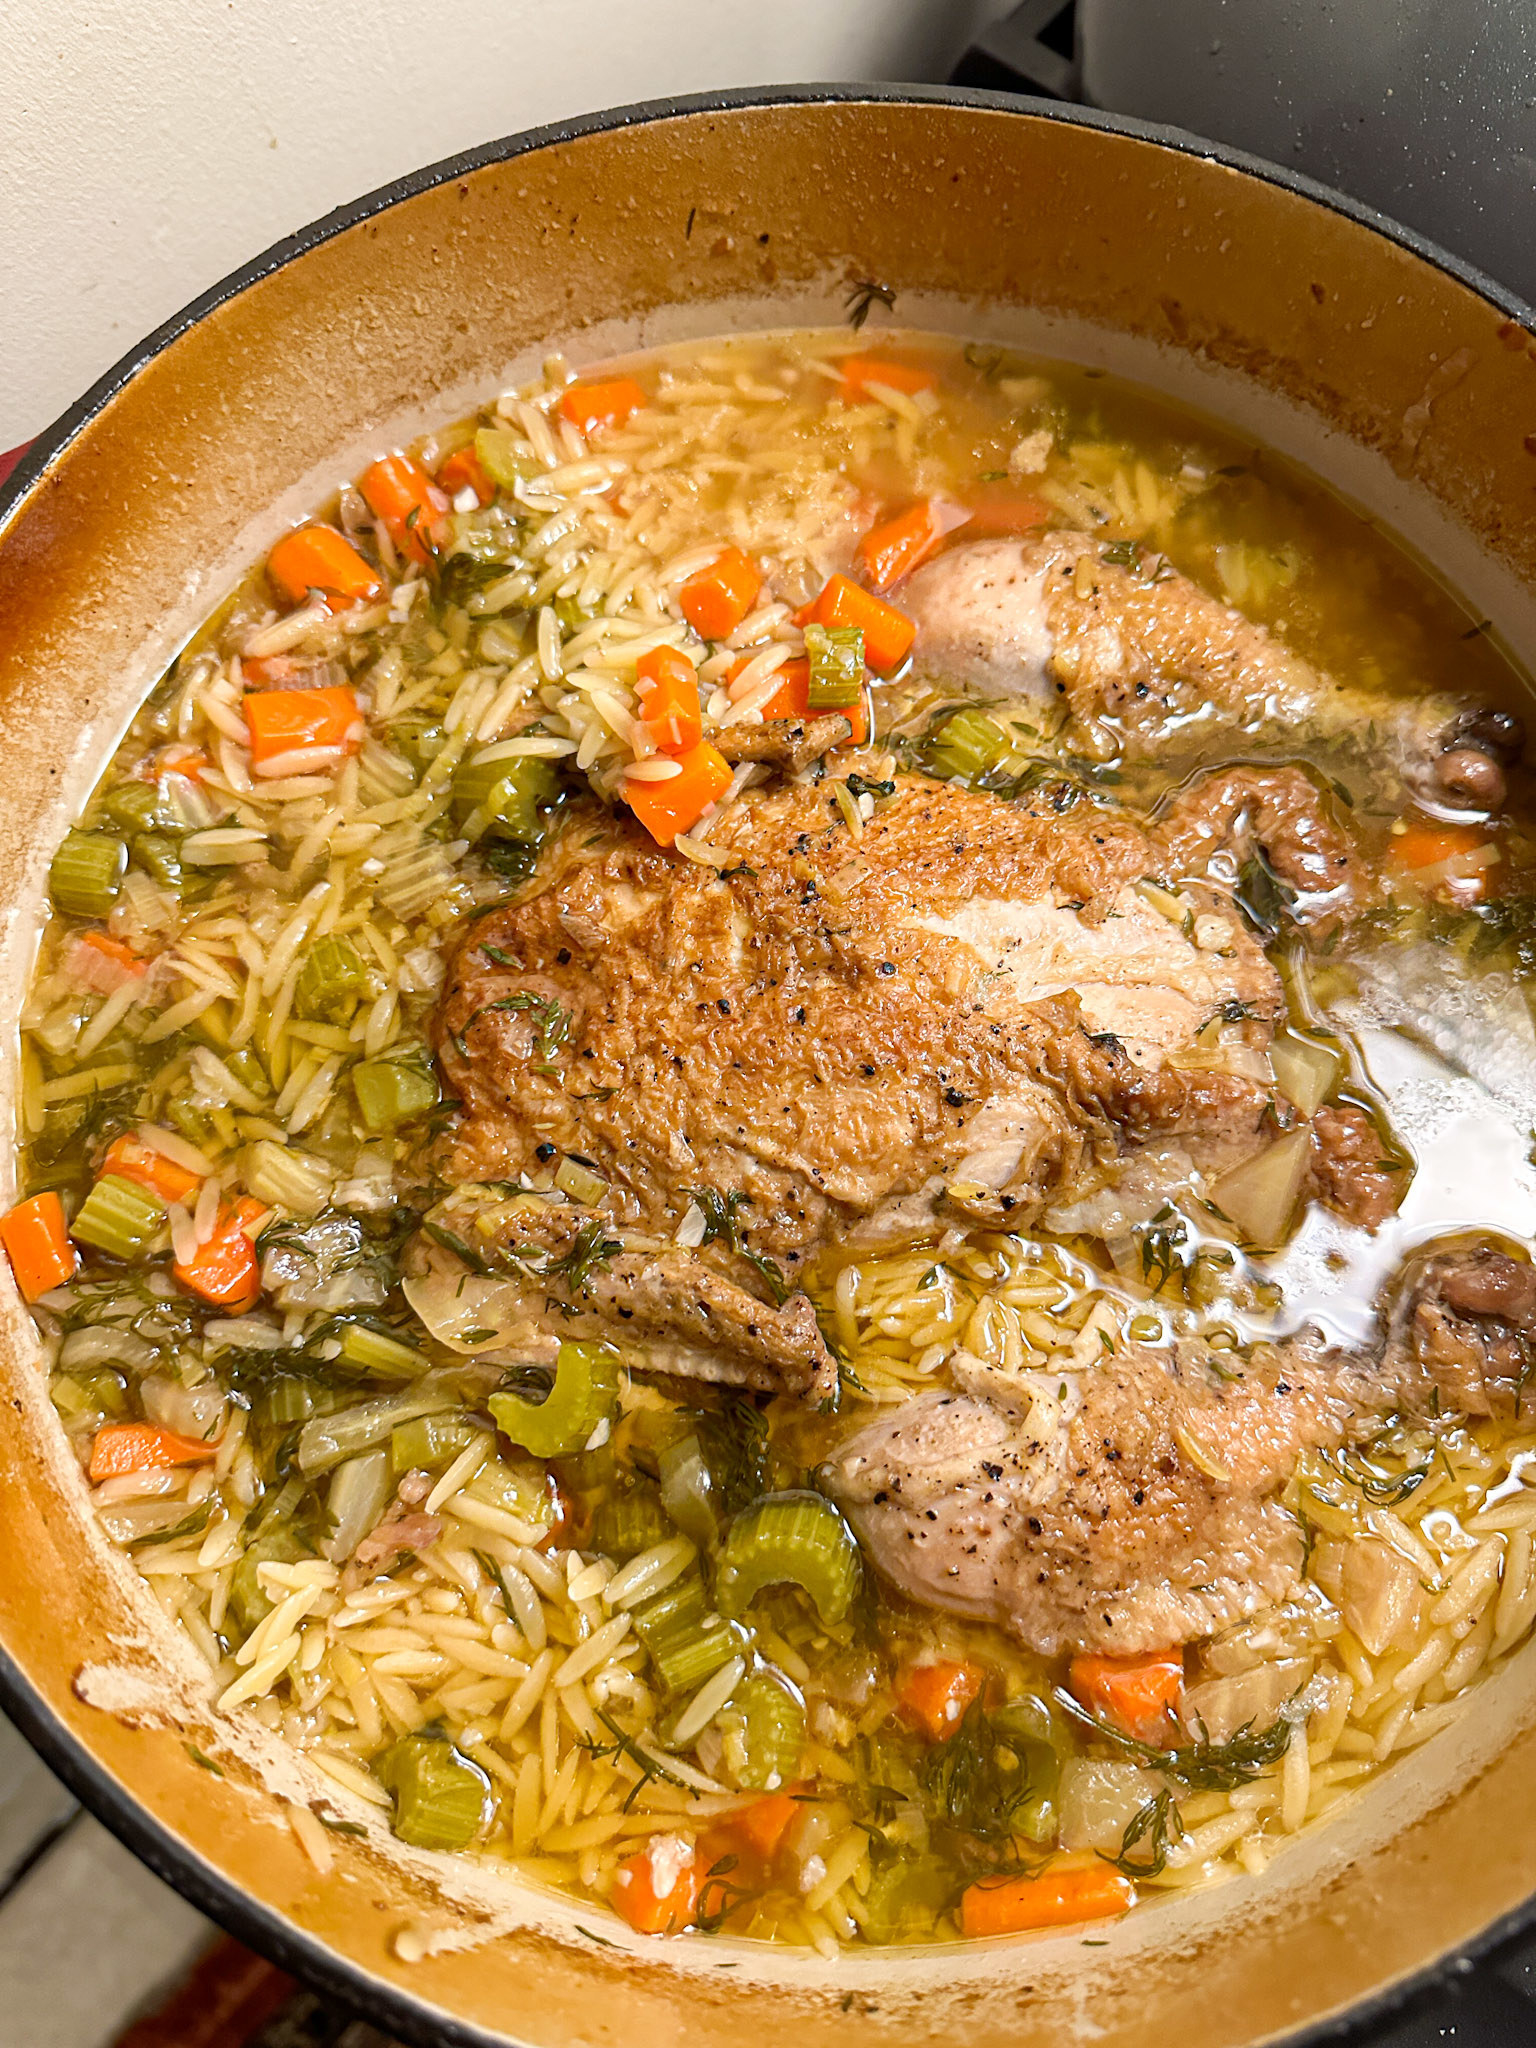 Dutch oven with a whole chicken inside, along with orzo and veggies in broth